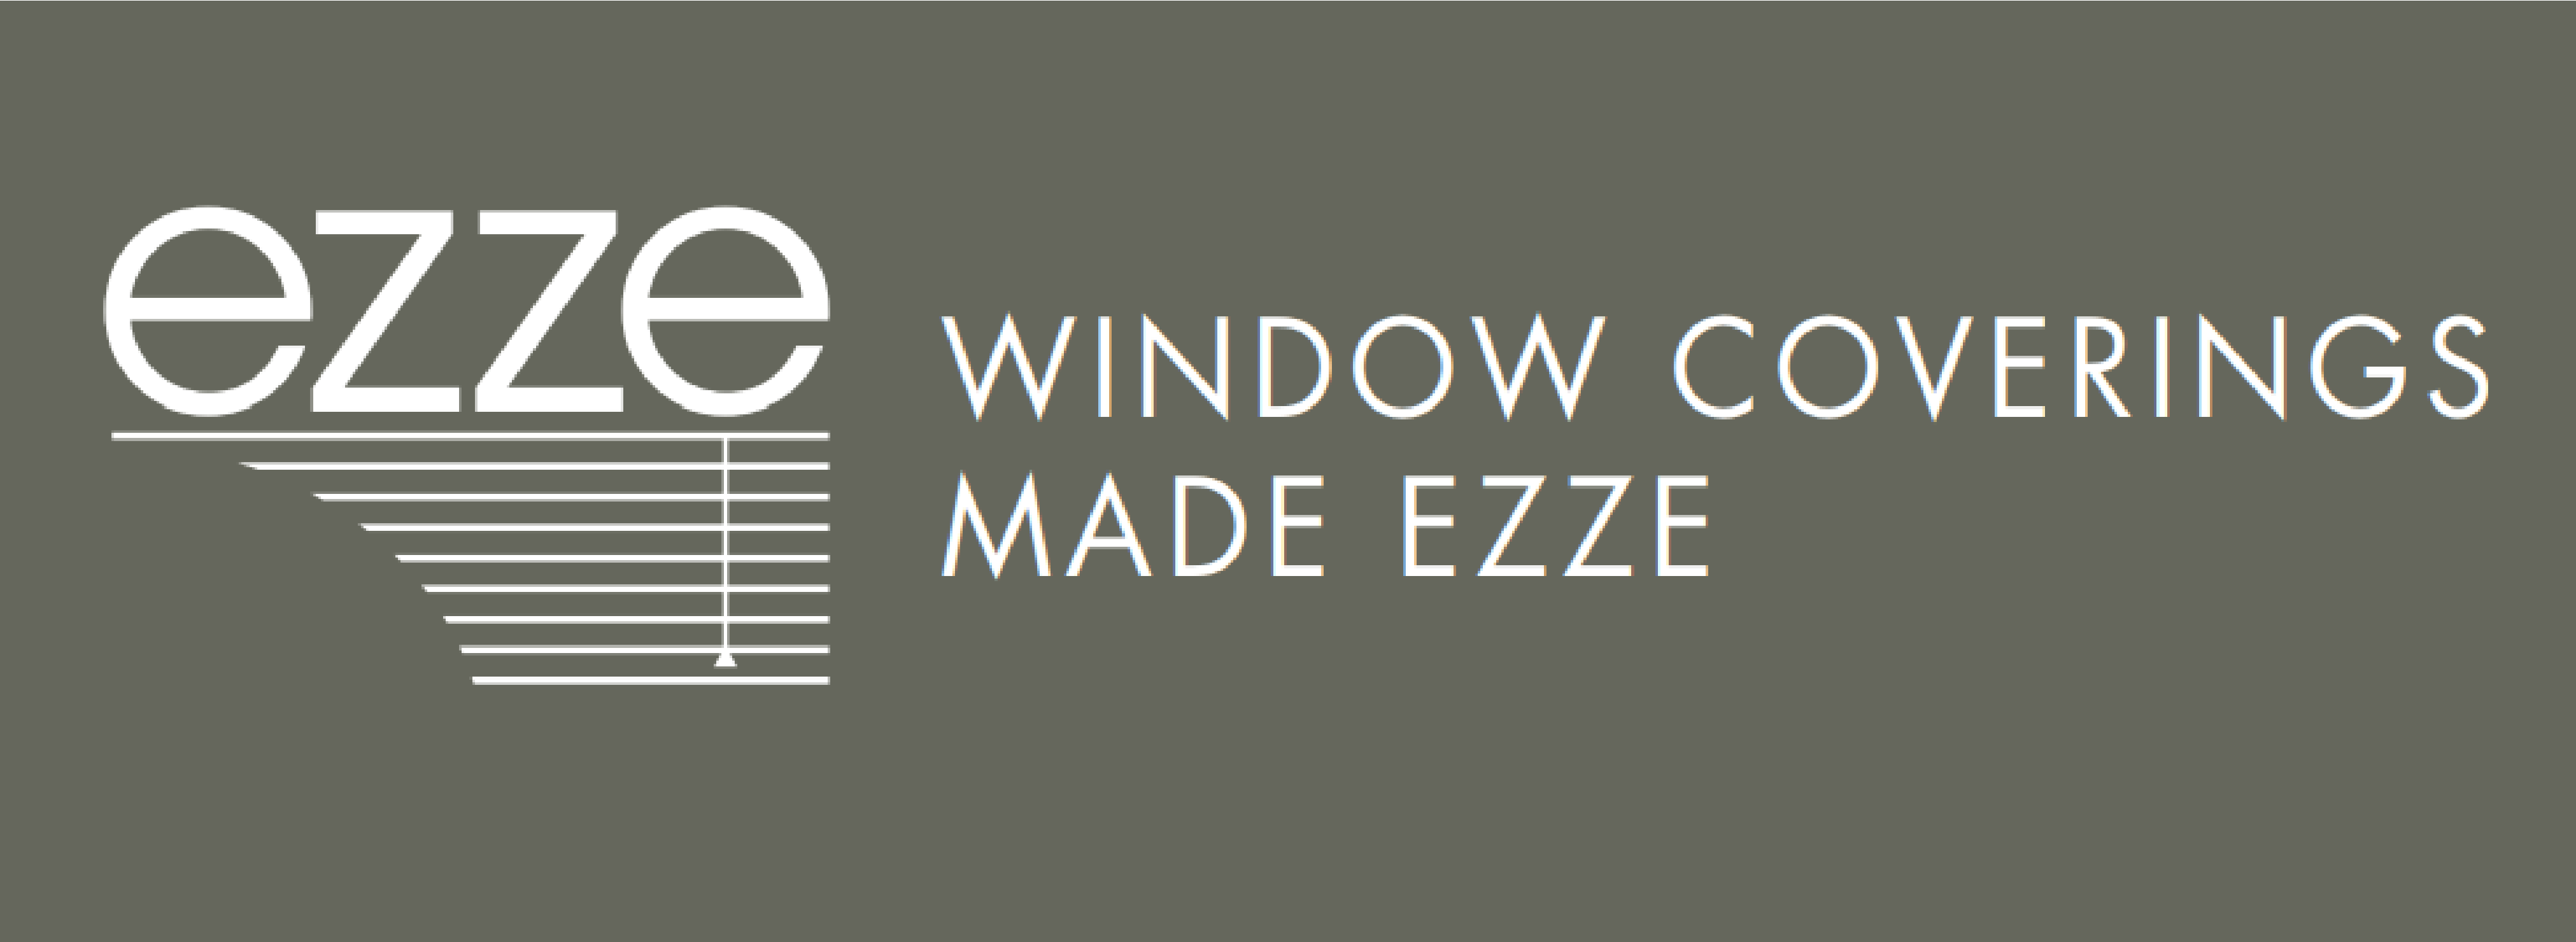 Ezze Shutters and Blinds